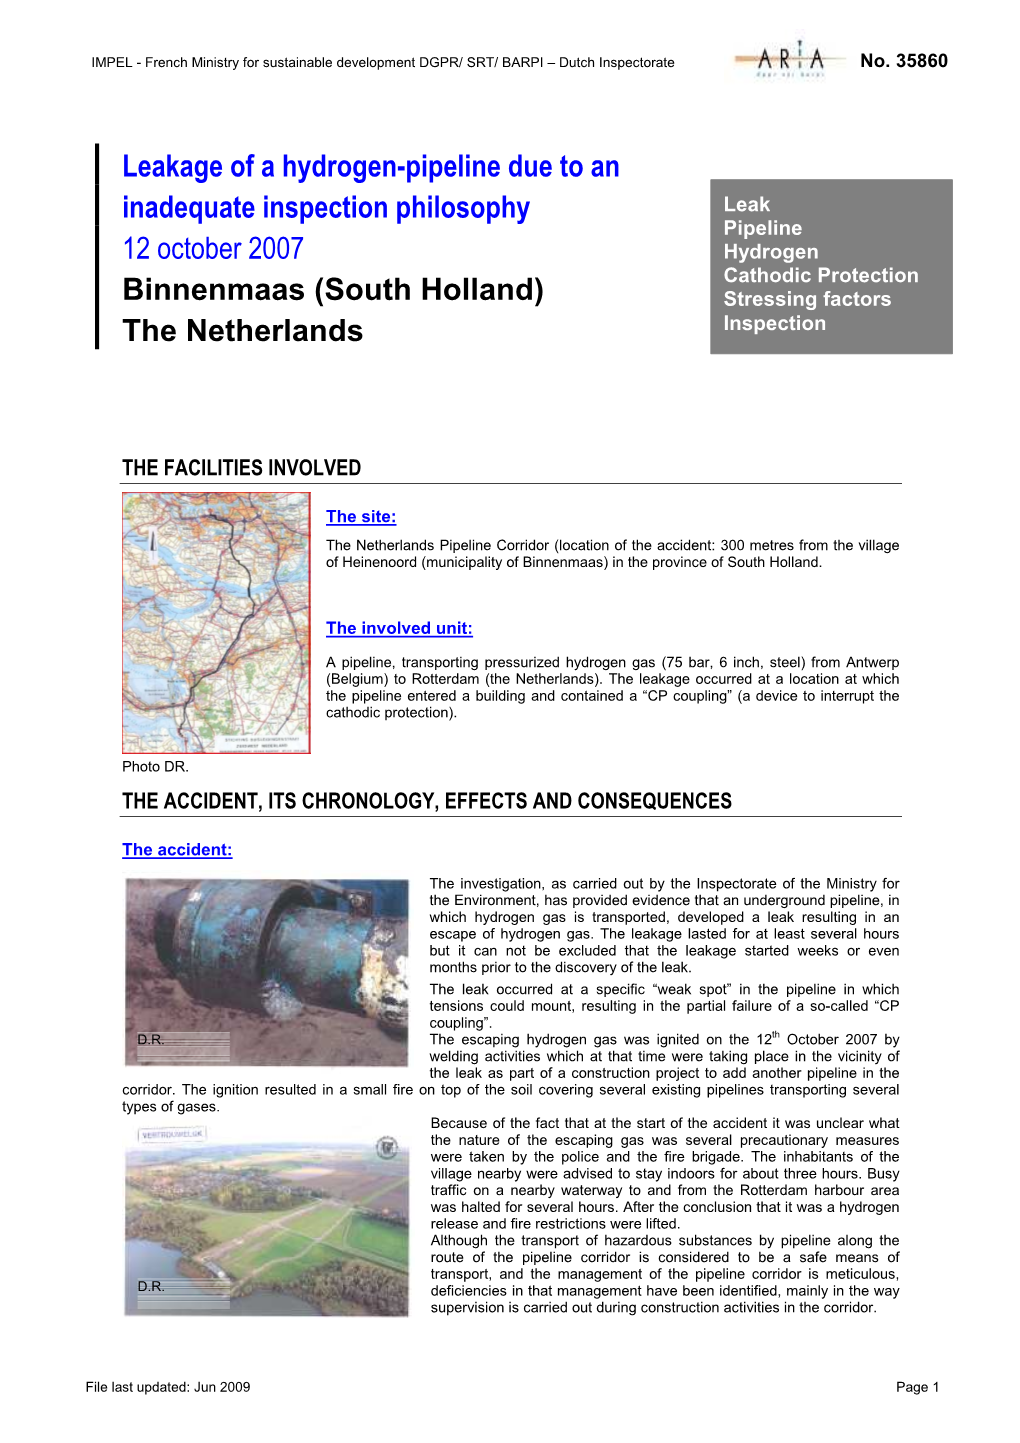 Leakage of a Hydrogen-Pipeline Due to an Inadequate Inspection